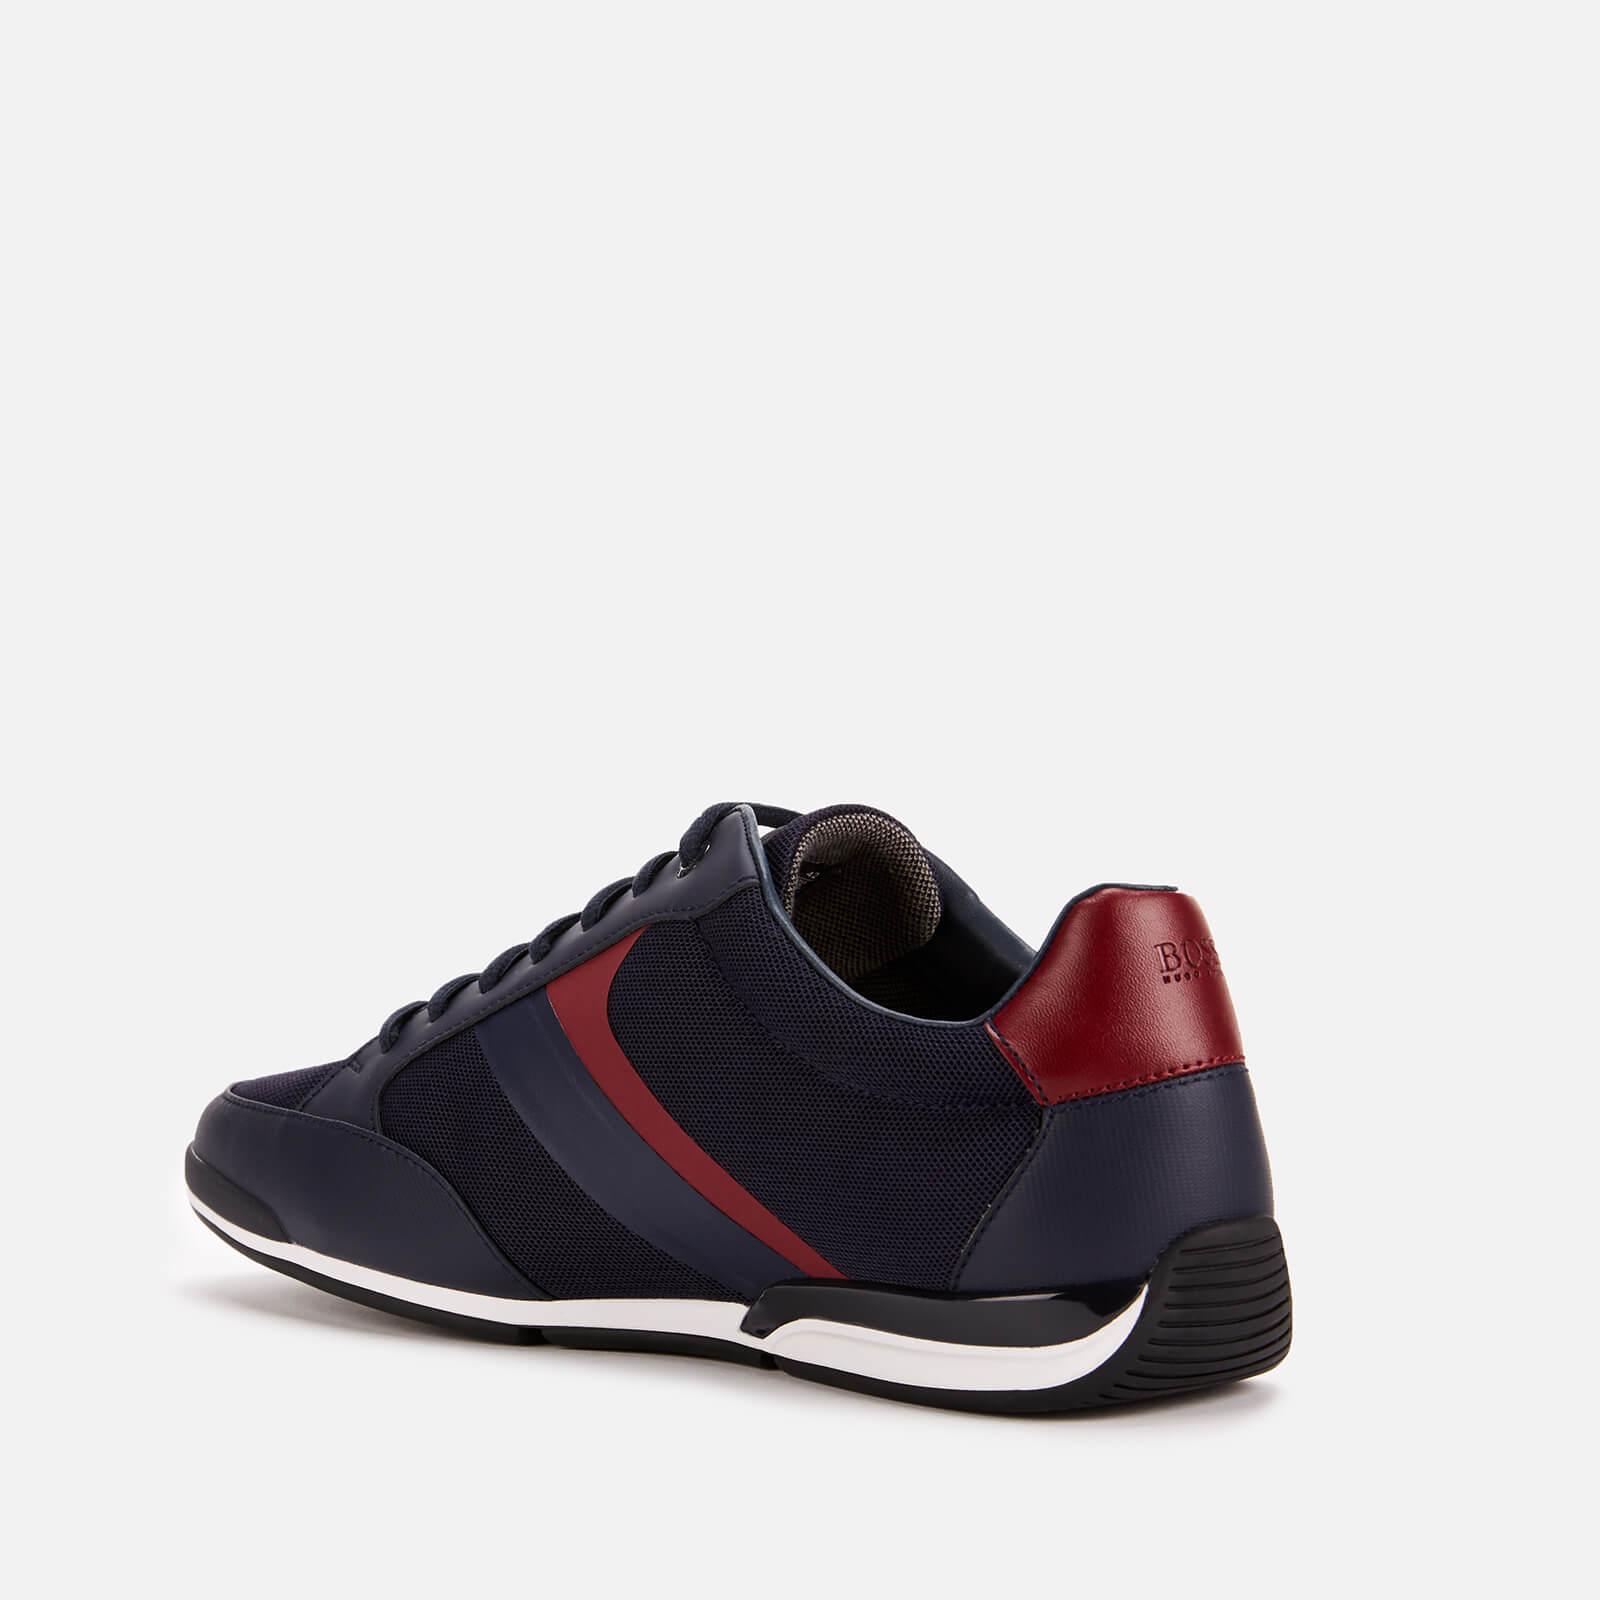 hugo boss saturn low leather trainers